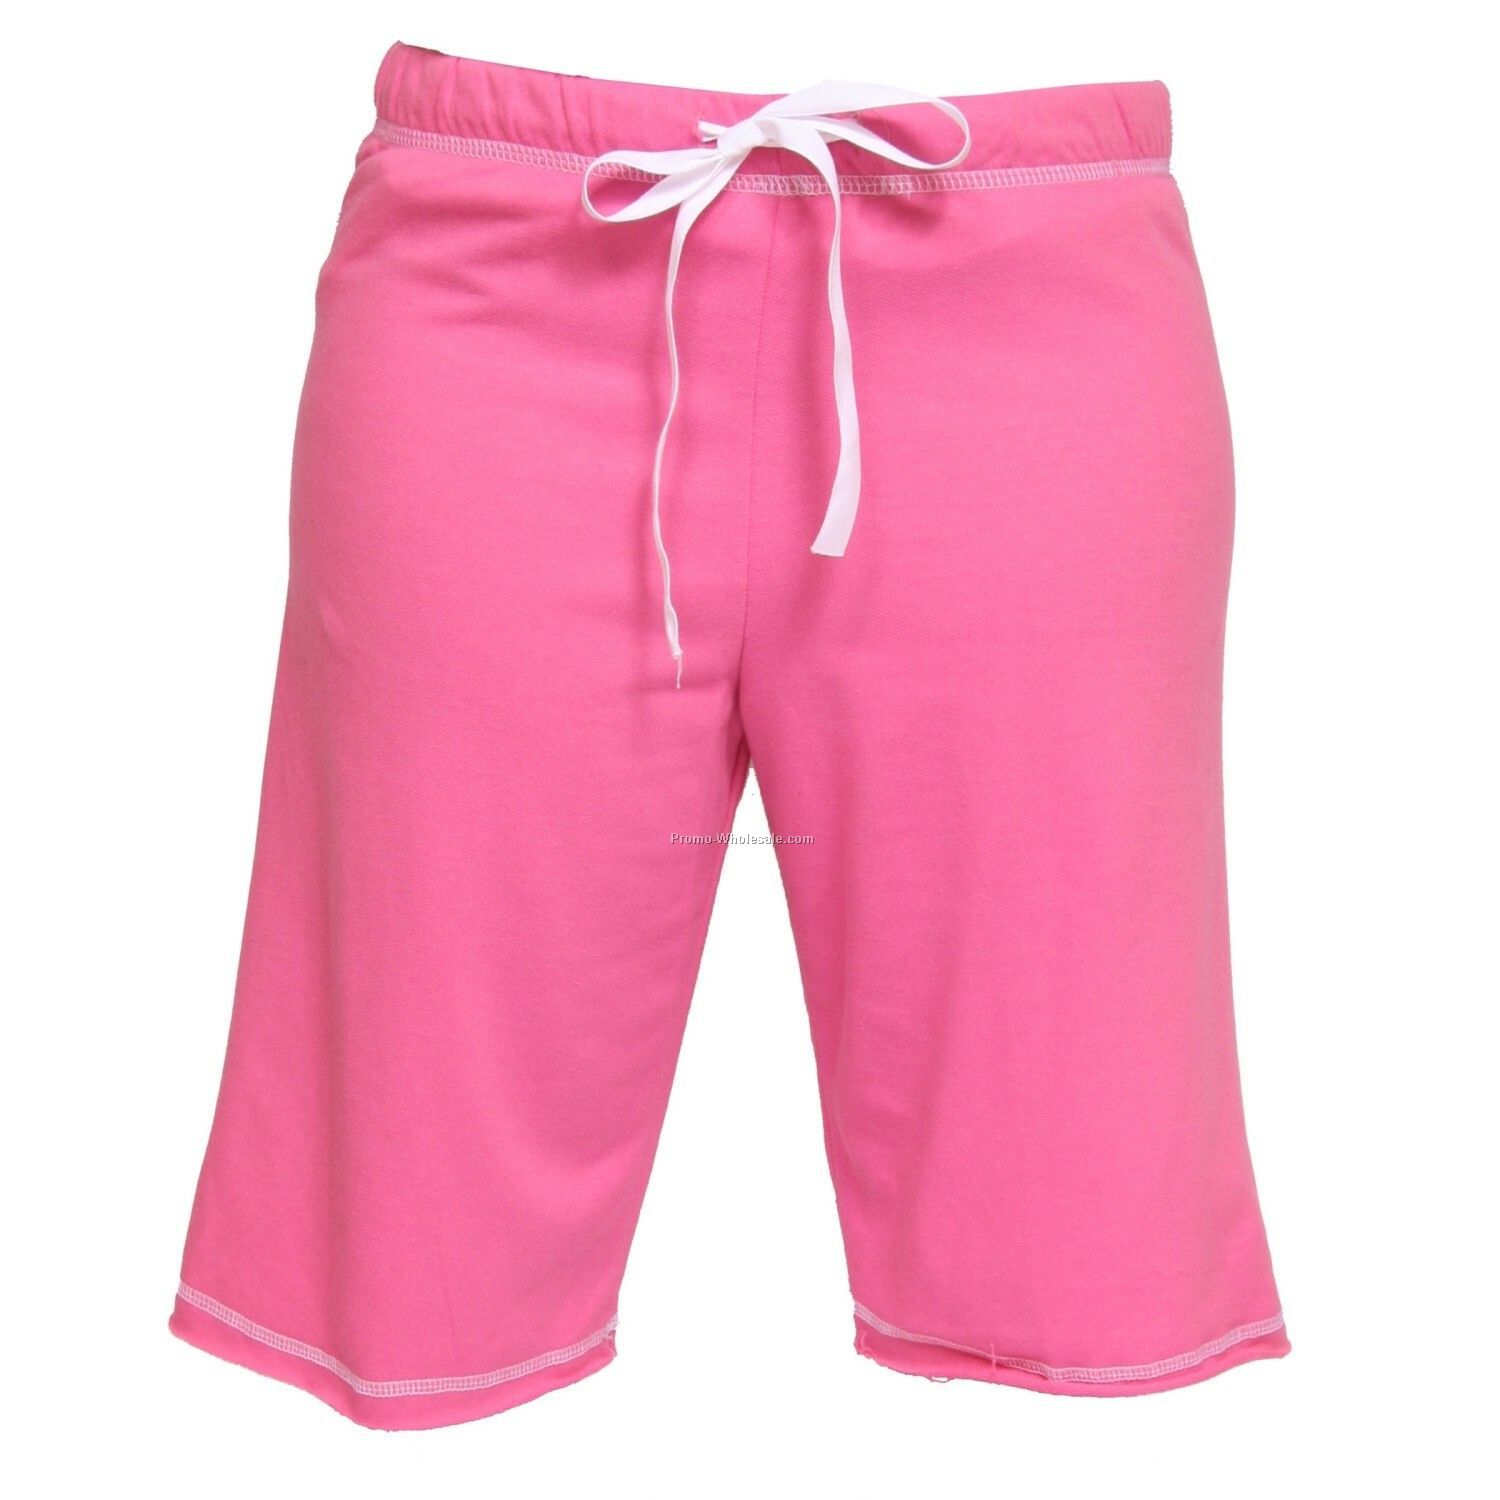 Youths' Pink Board Shorts (Ys-yl)